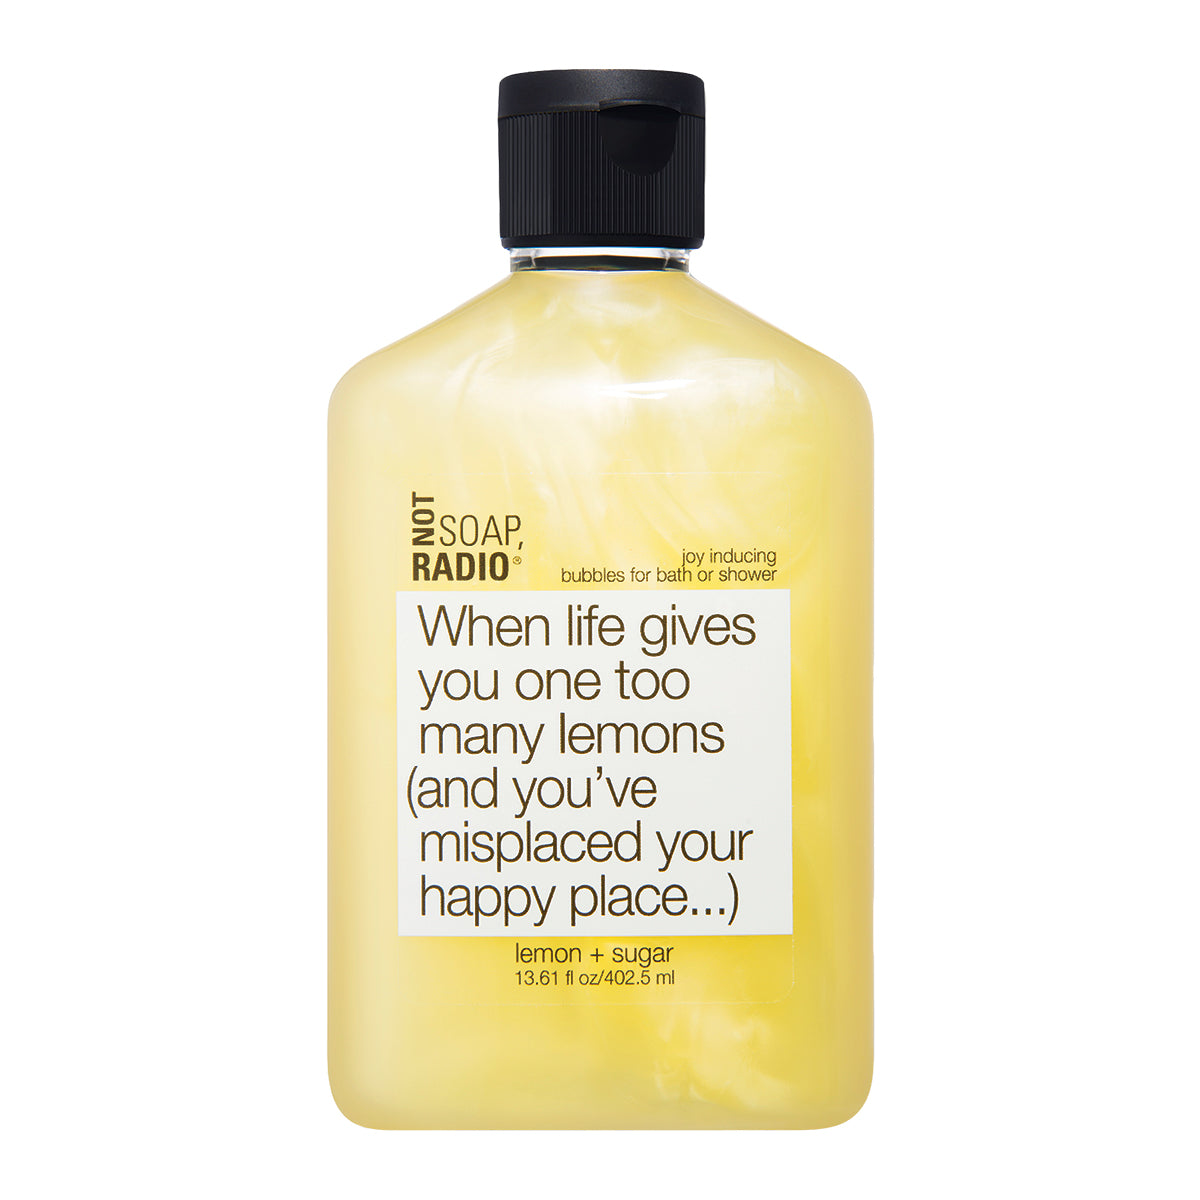 When life gives you one too many lemons (and you've misplaced your happy place...) - Not Soap Radio Bubbles for bath/shower